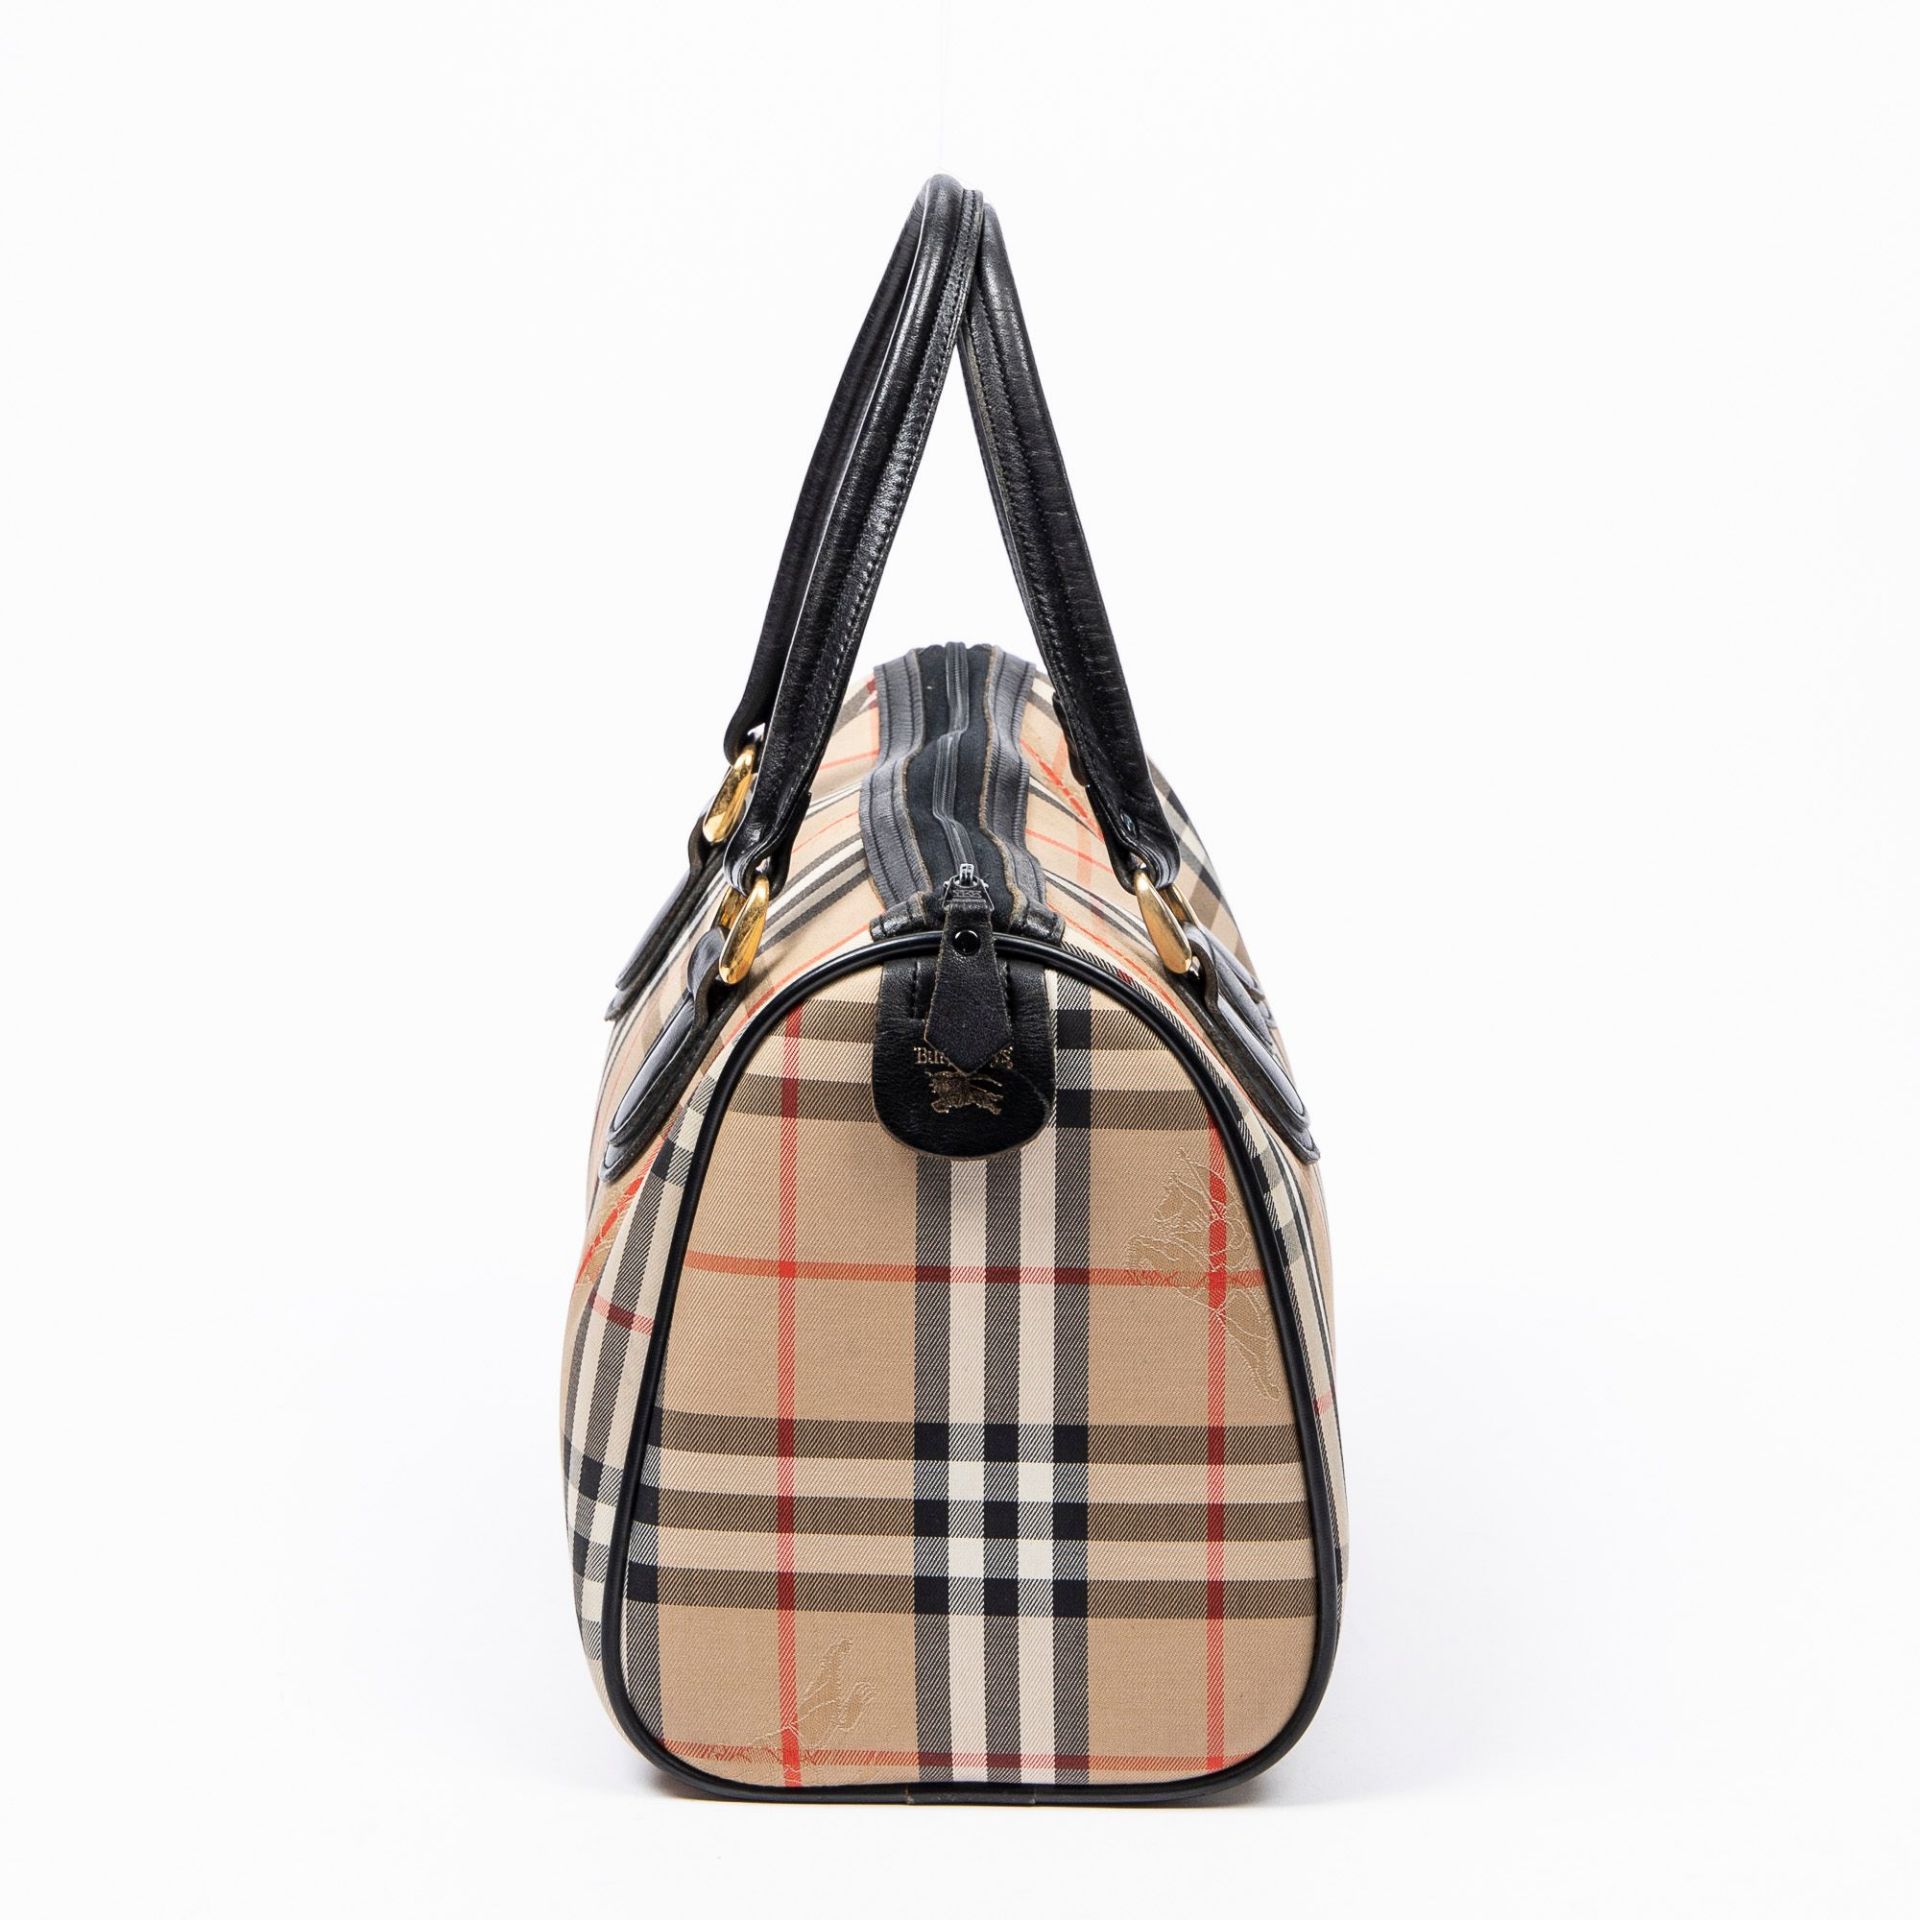 RRP £890 Burberry Rare Vintage Burberry's Boston Bag in Beige/Black AAP8310 Grade AB Please - Image 4 of 4